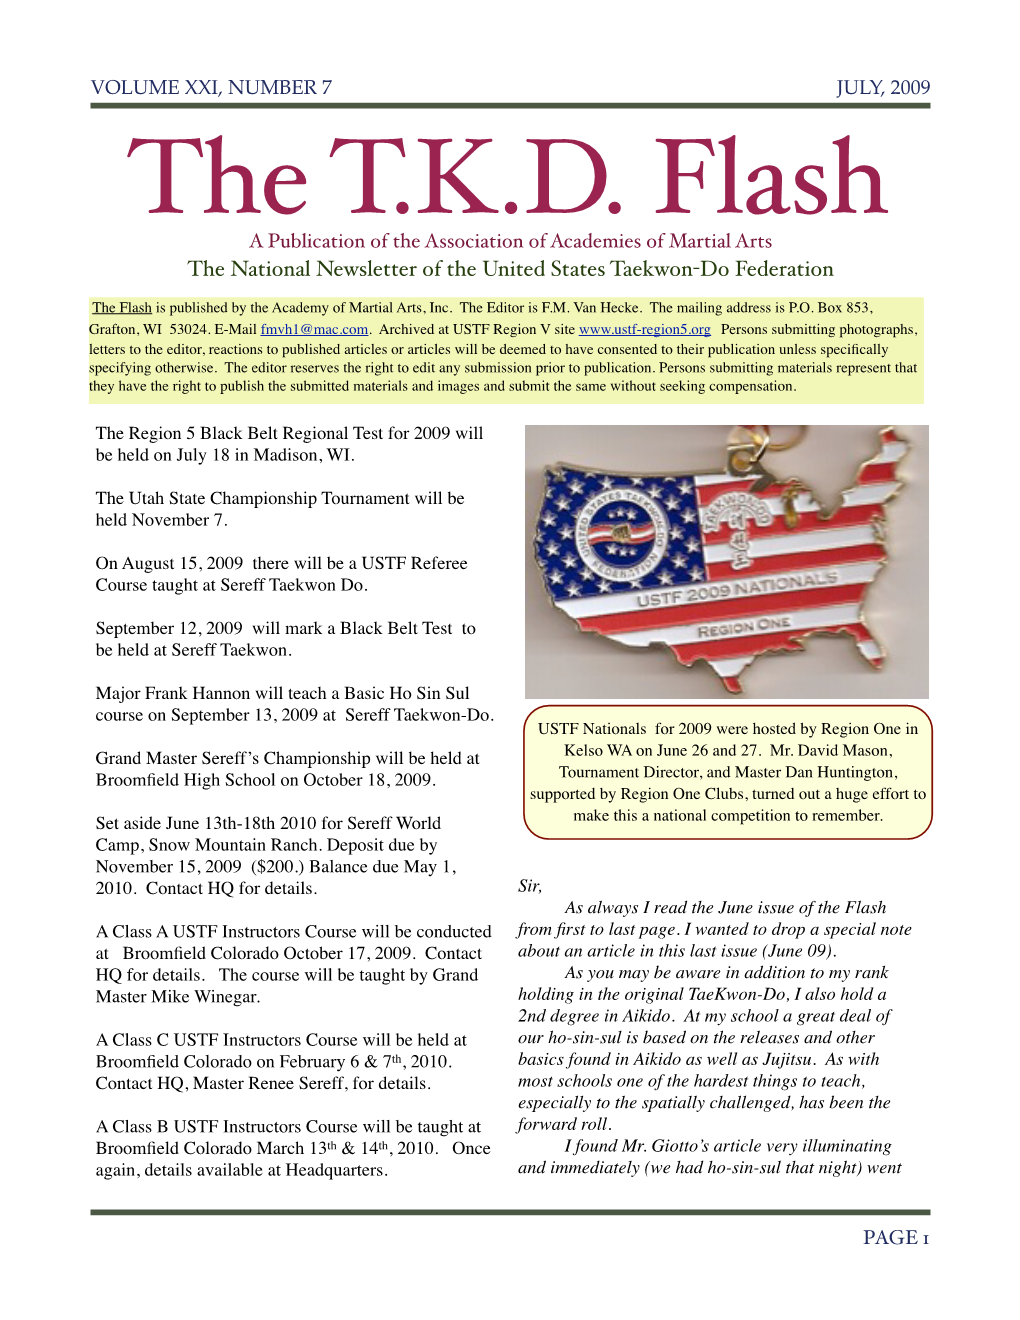 The T.K.D. Flash a Publication of the Association of Academies of Martial Arts the National Newsletter of the United States Taekwon-Do Federation